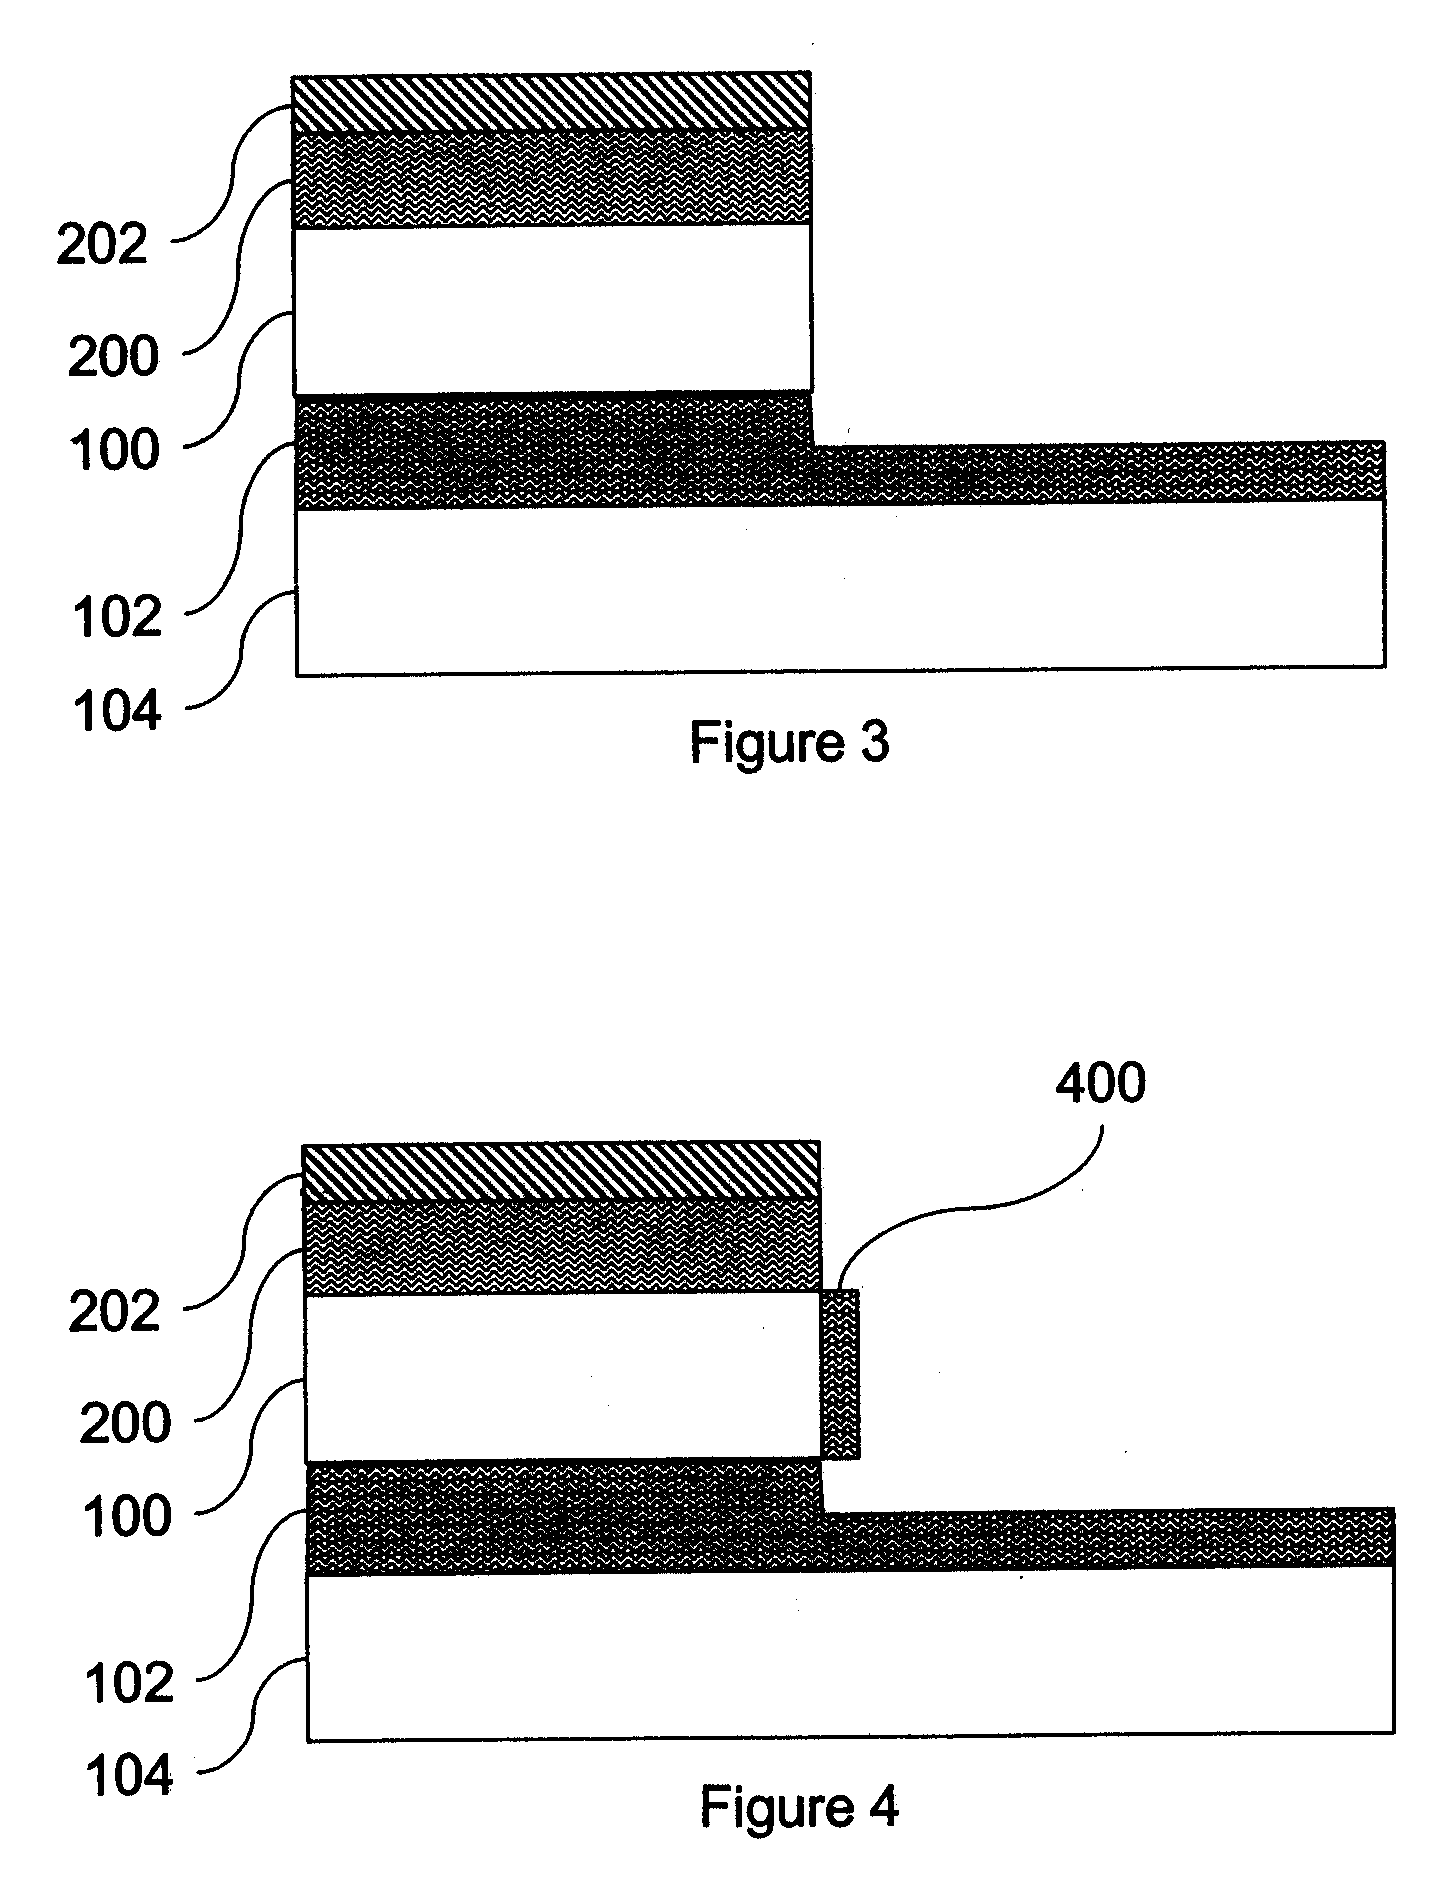 High mobility plane finfet with equal drive strength